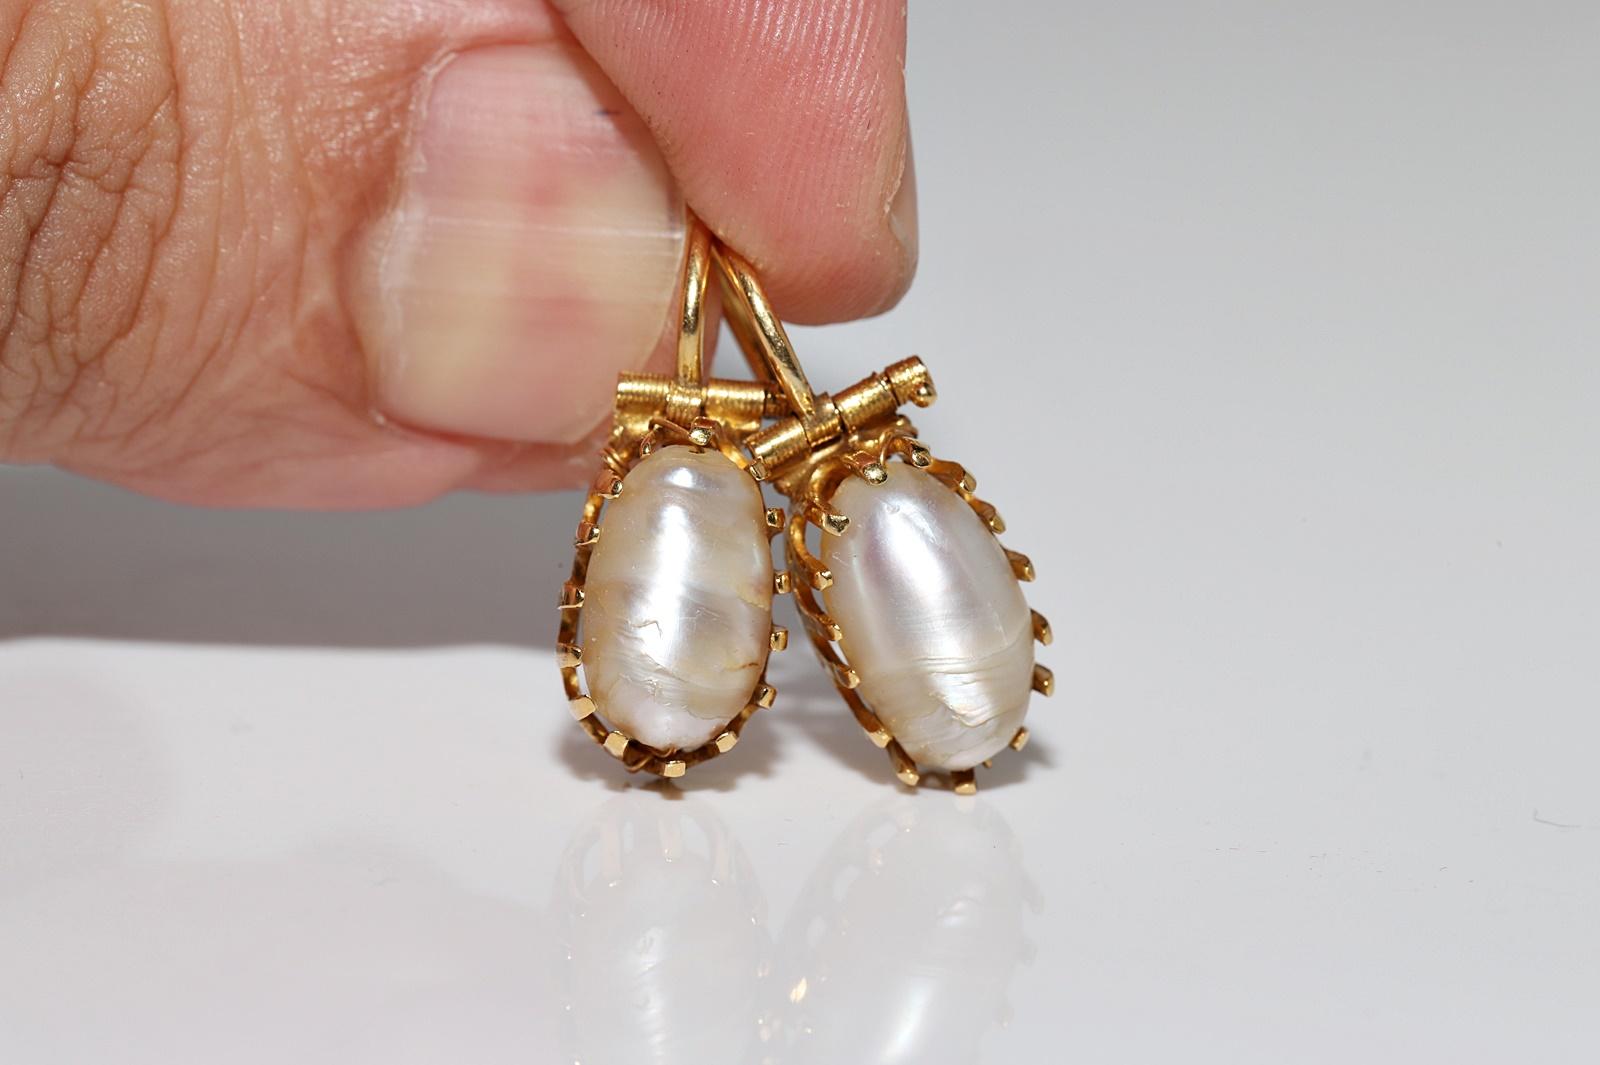 Antique Circa 1900s 18k Gold Handmade Natural Pearl Decorated Solitaire Earring In Good Condition For Sale In Fatih/İstanbul, 34